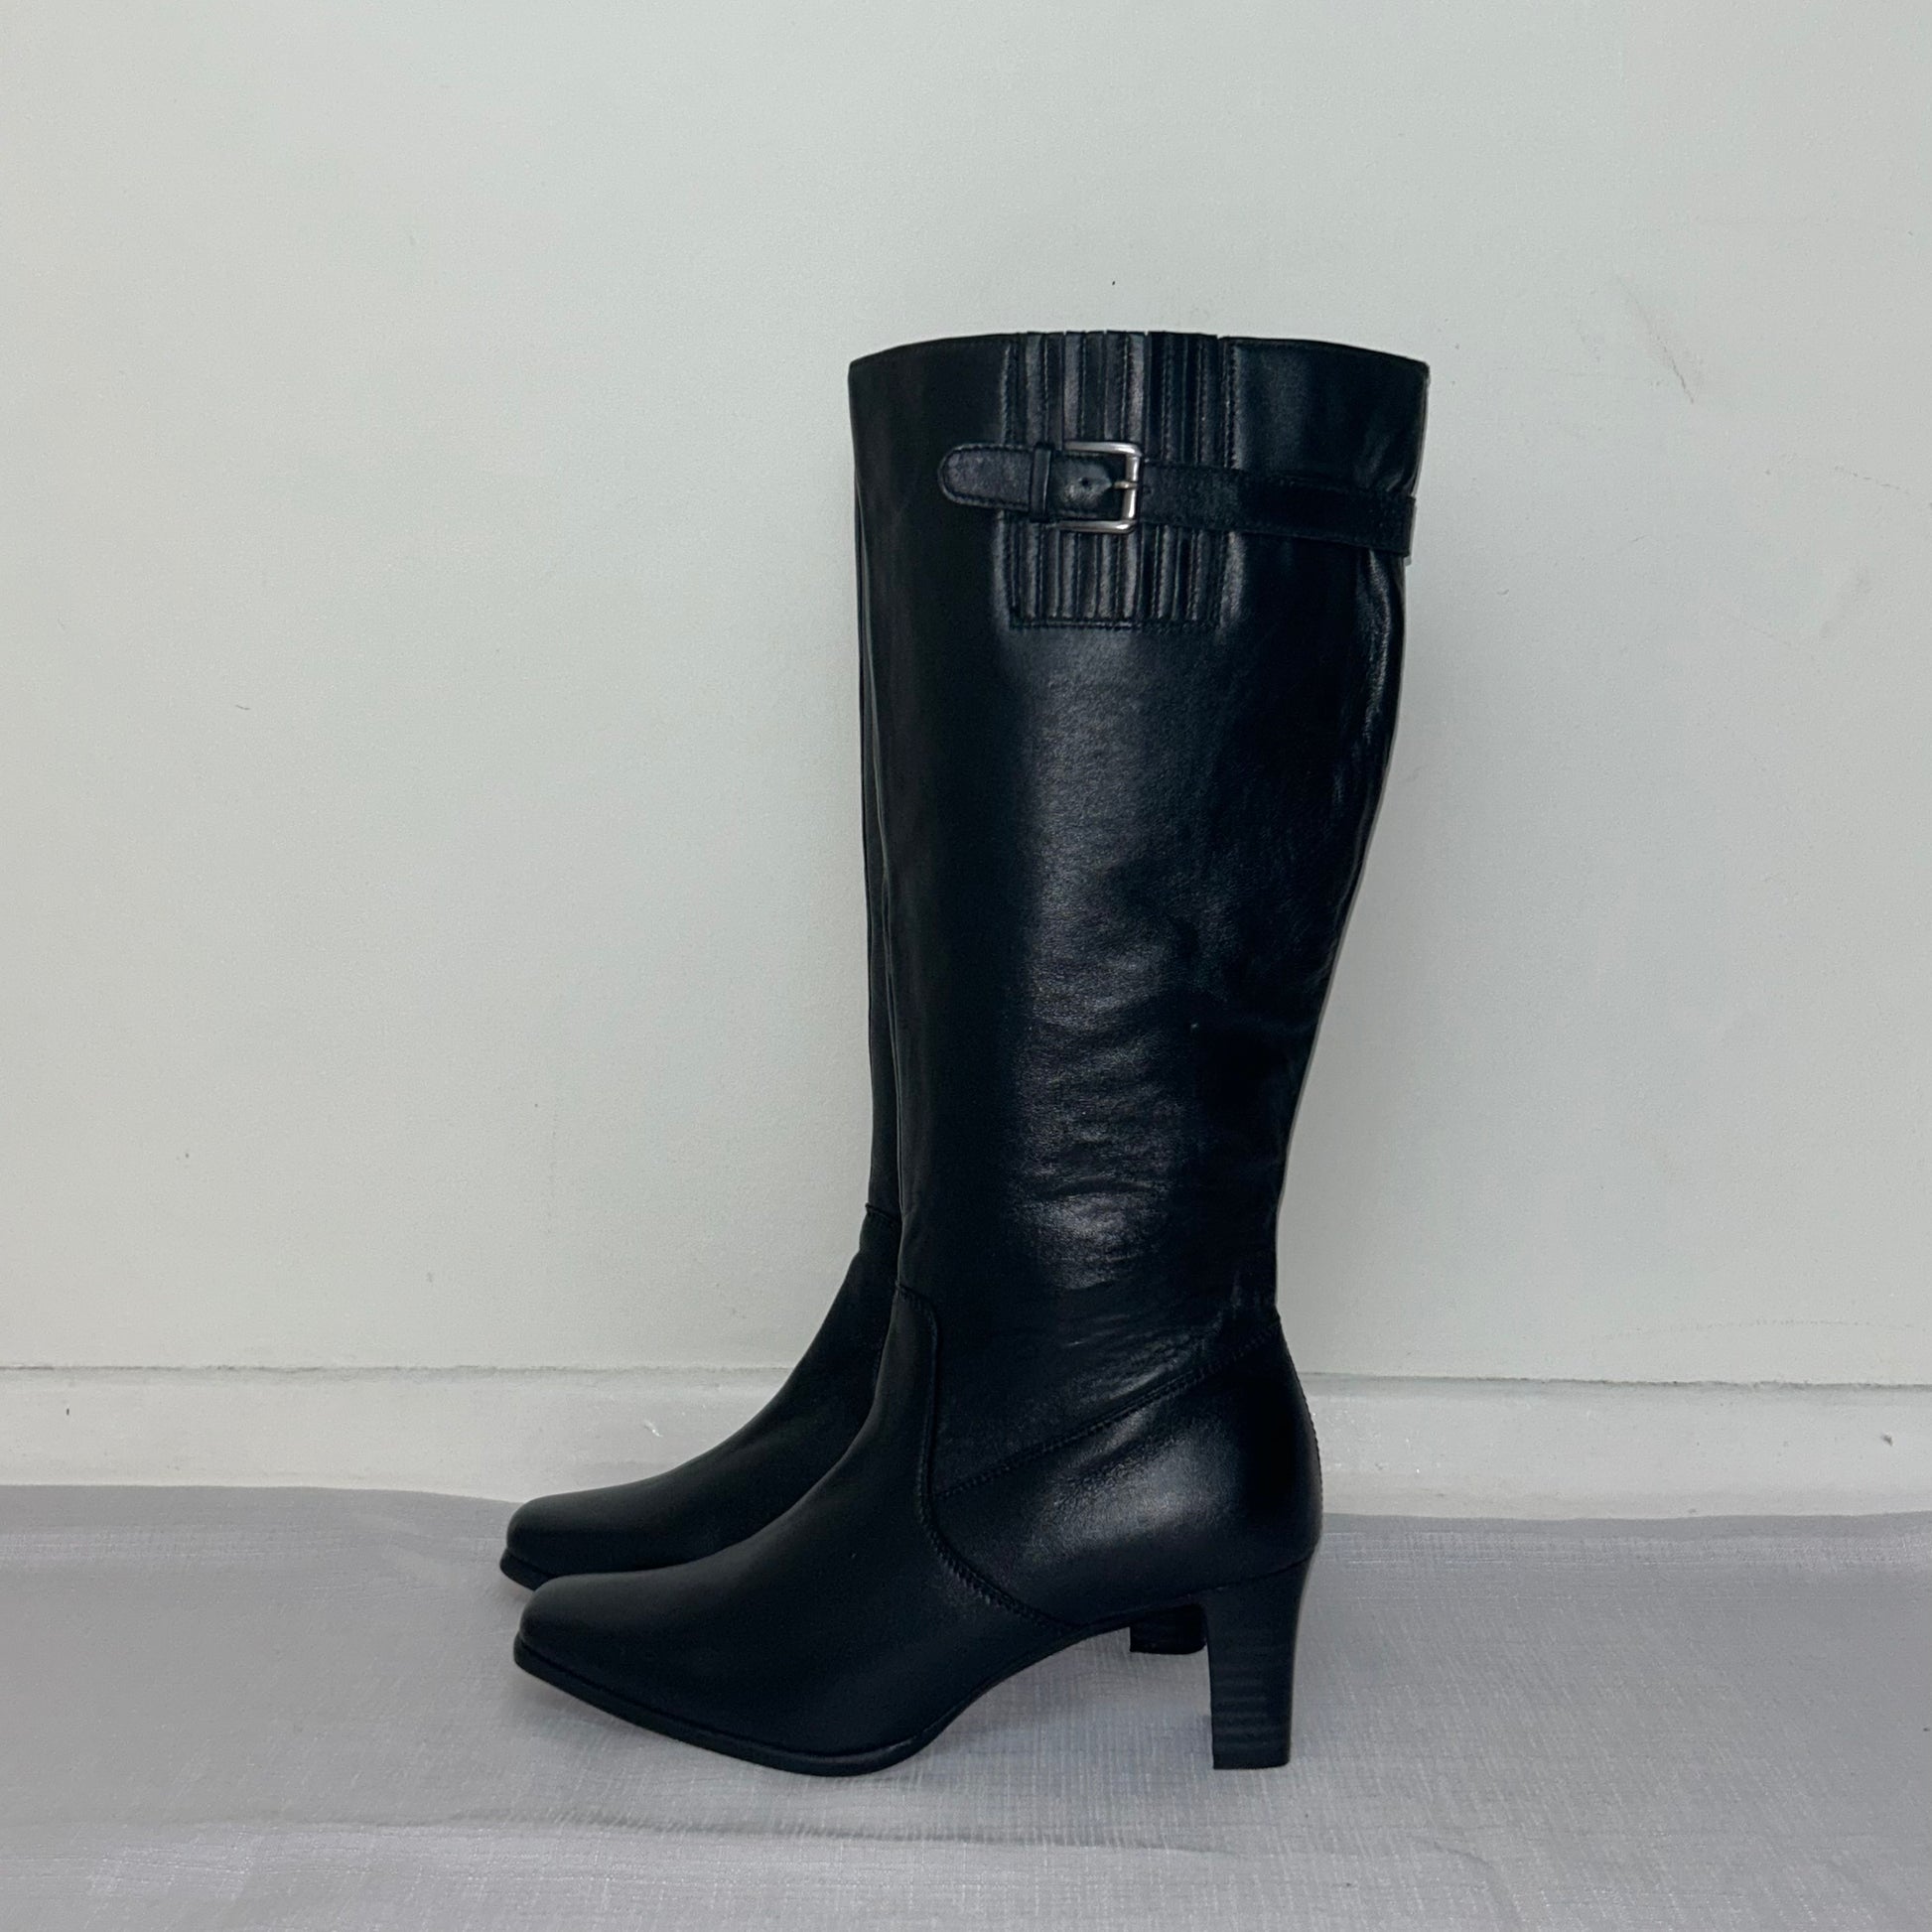 black knee high buckle boots shown on a white background